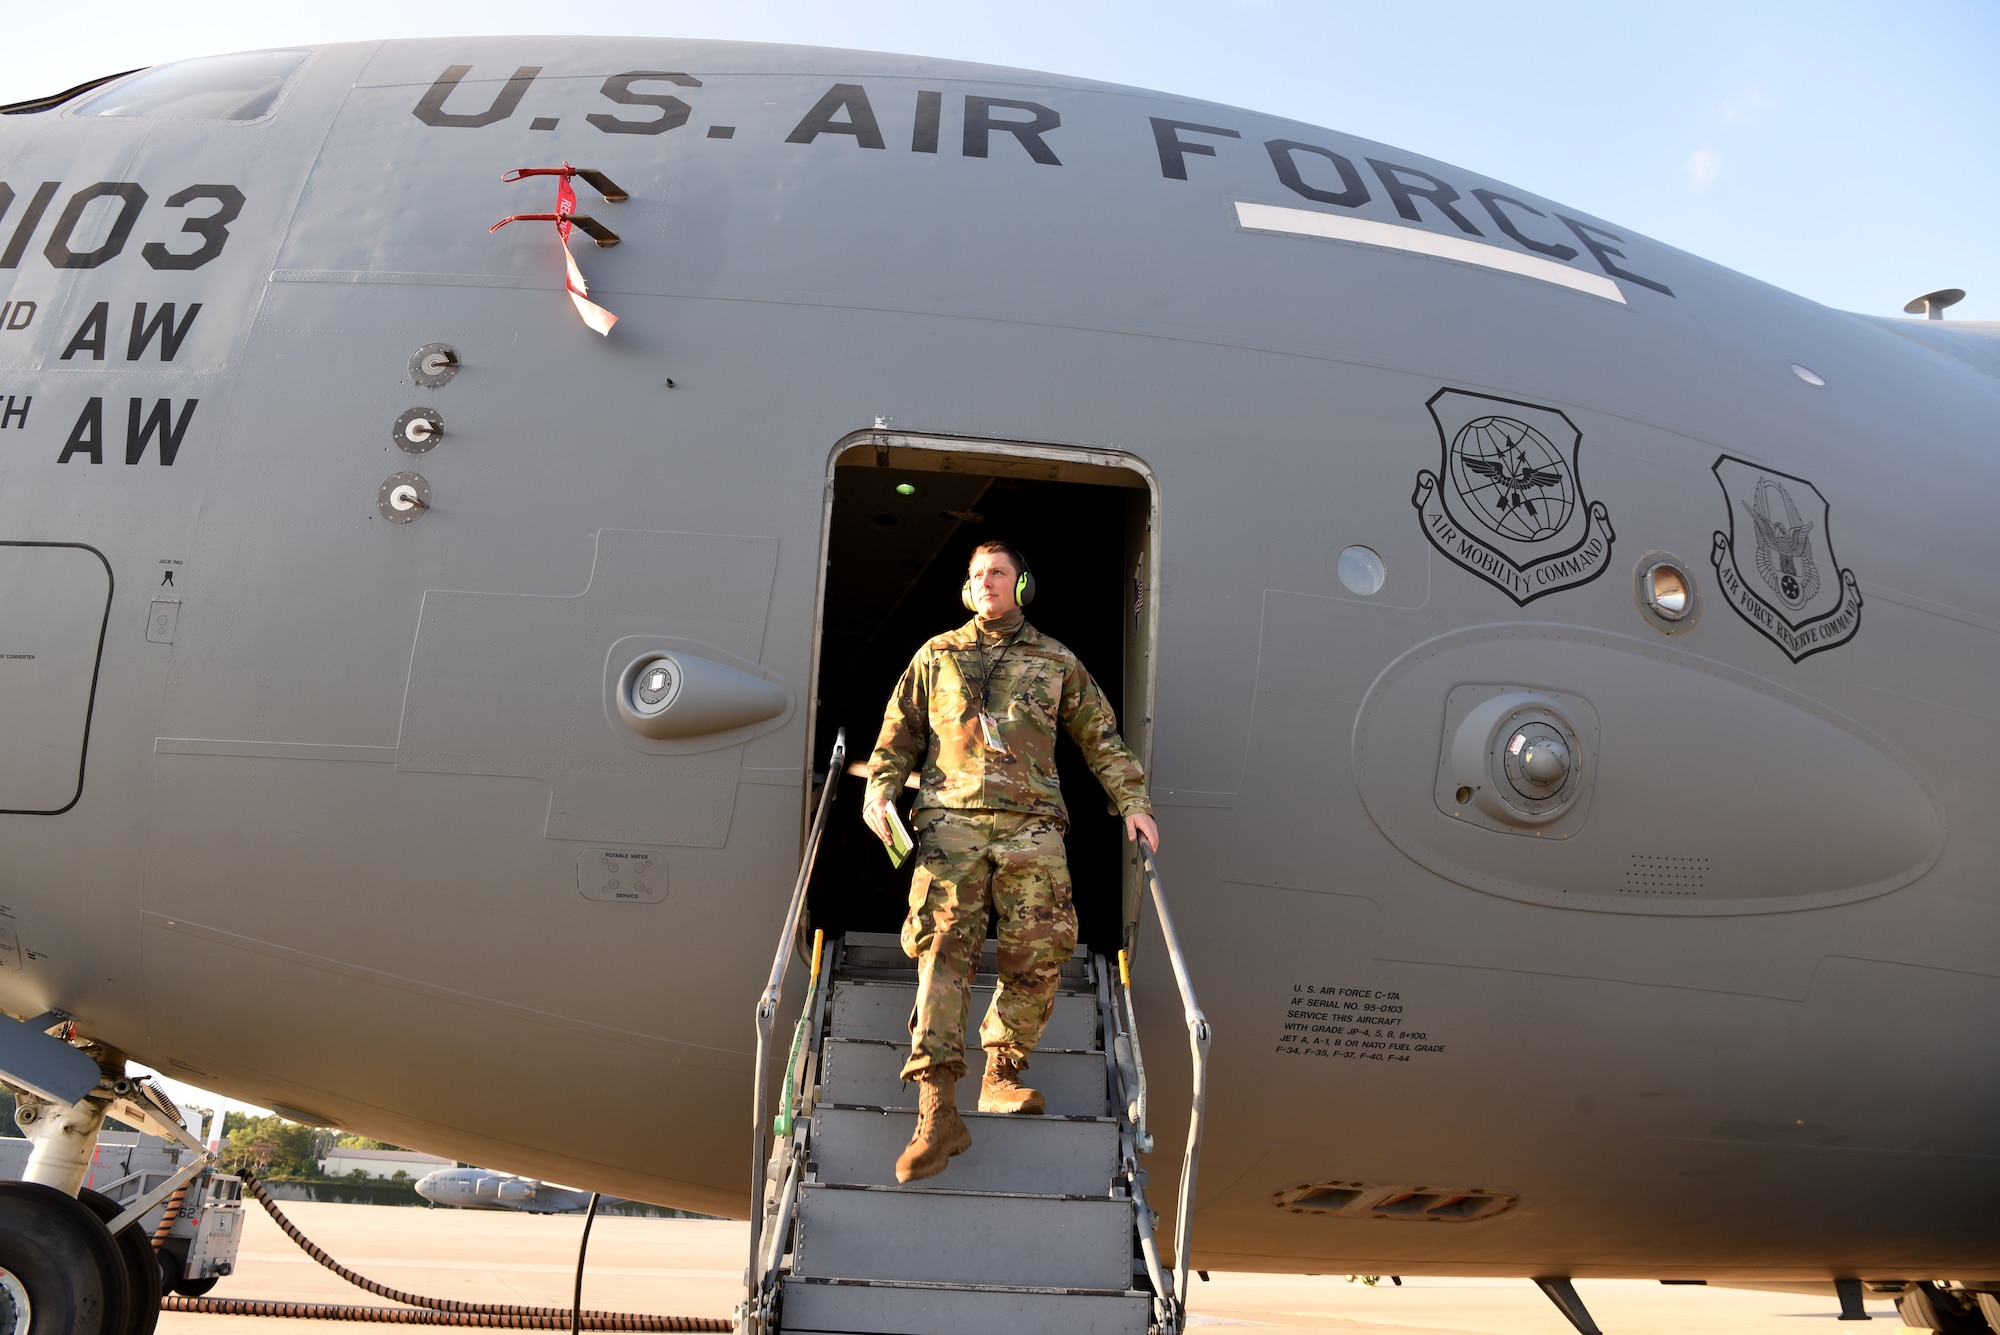 U.S. Air Force Staff Sgt. Taylor J. Eide, 721st Aircraft Maintenance Squadron quality assurance inspector, exits a C-17 Globemaster III aircraft at Ramstein Air Base, Germany, May 21, 2020.